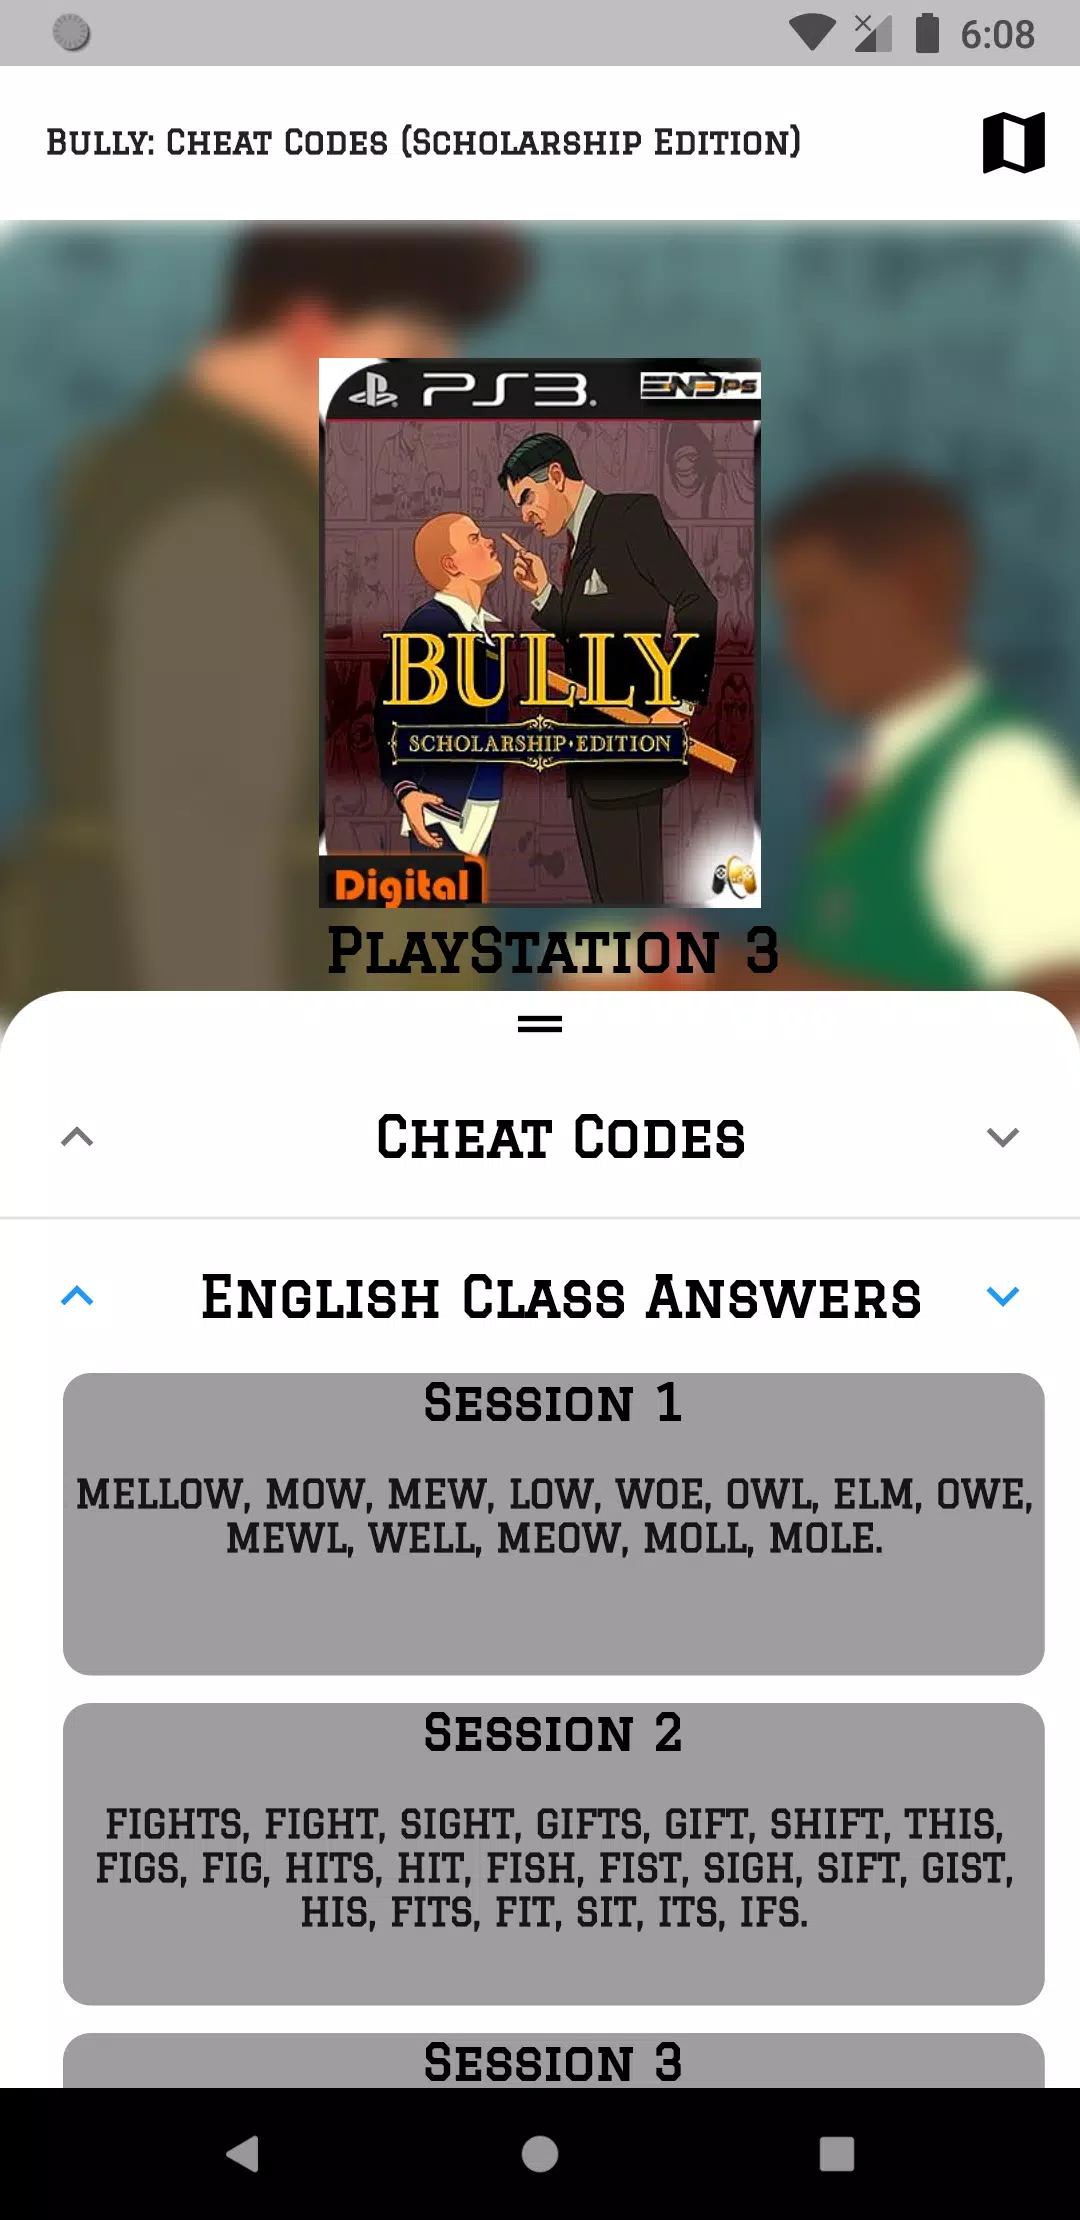 Bully: Cheat Codes - Scholarship Edition APK pour Android Télécharger